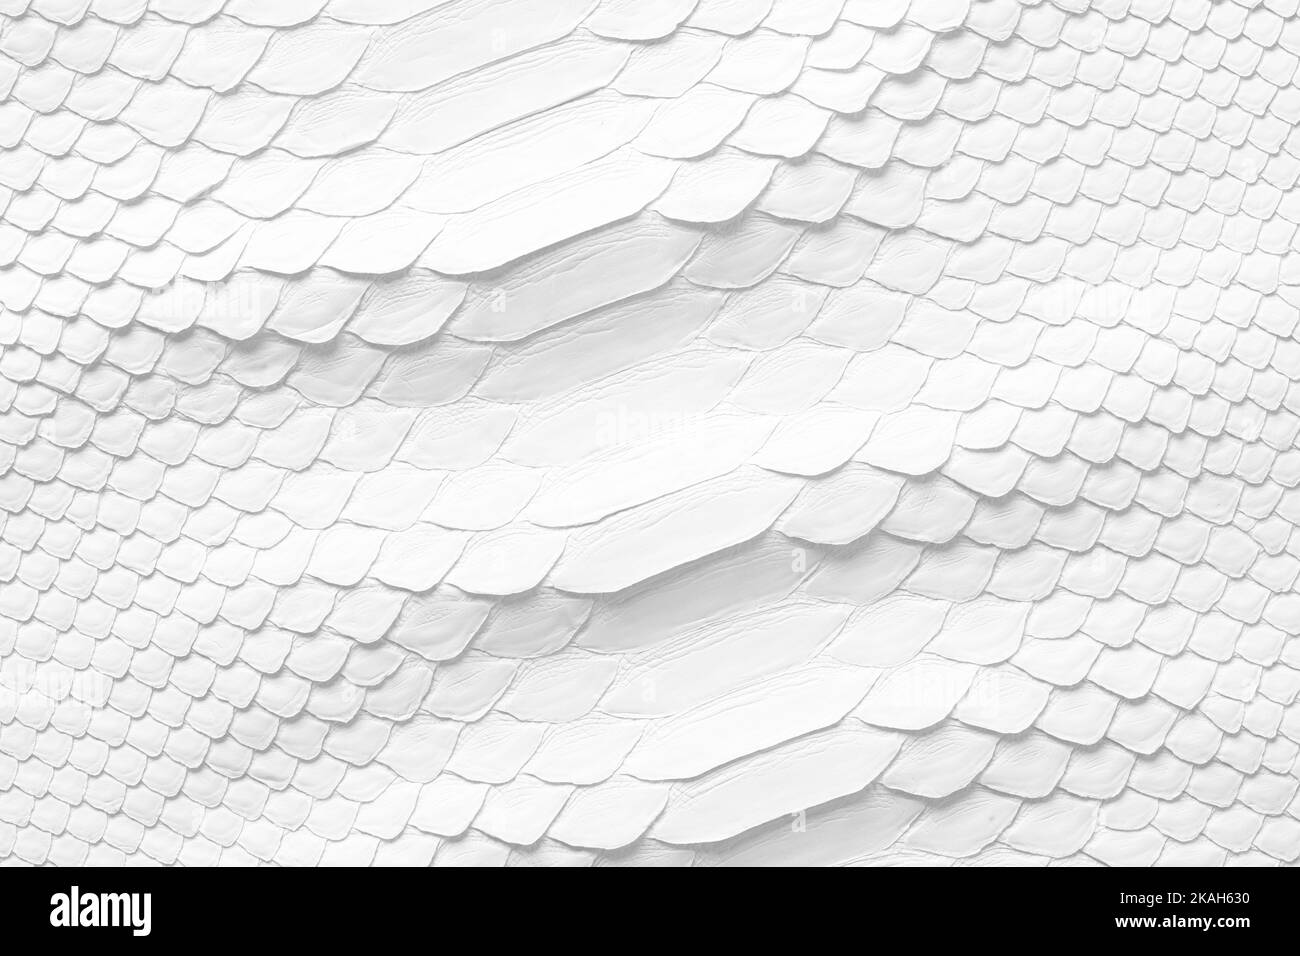 White snake skin texture, natural reptile leather as background Stock Photo